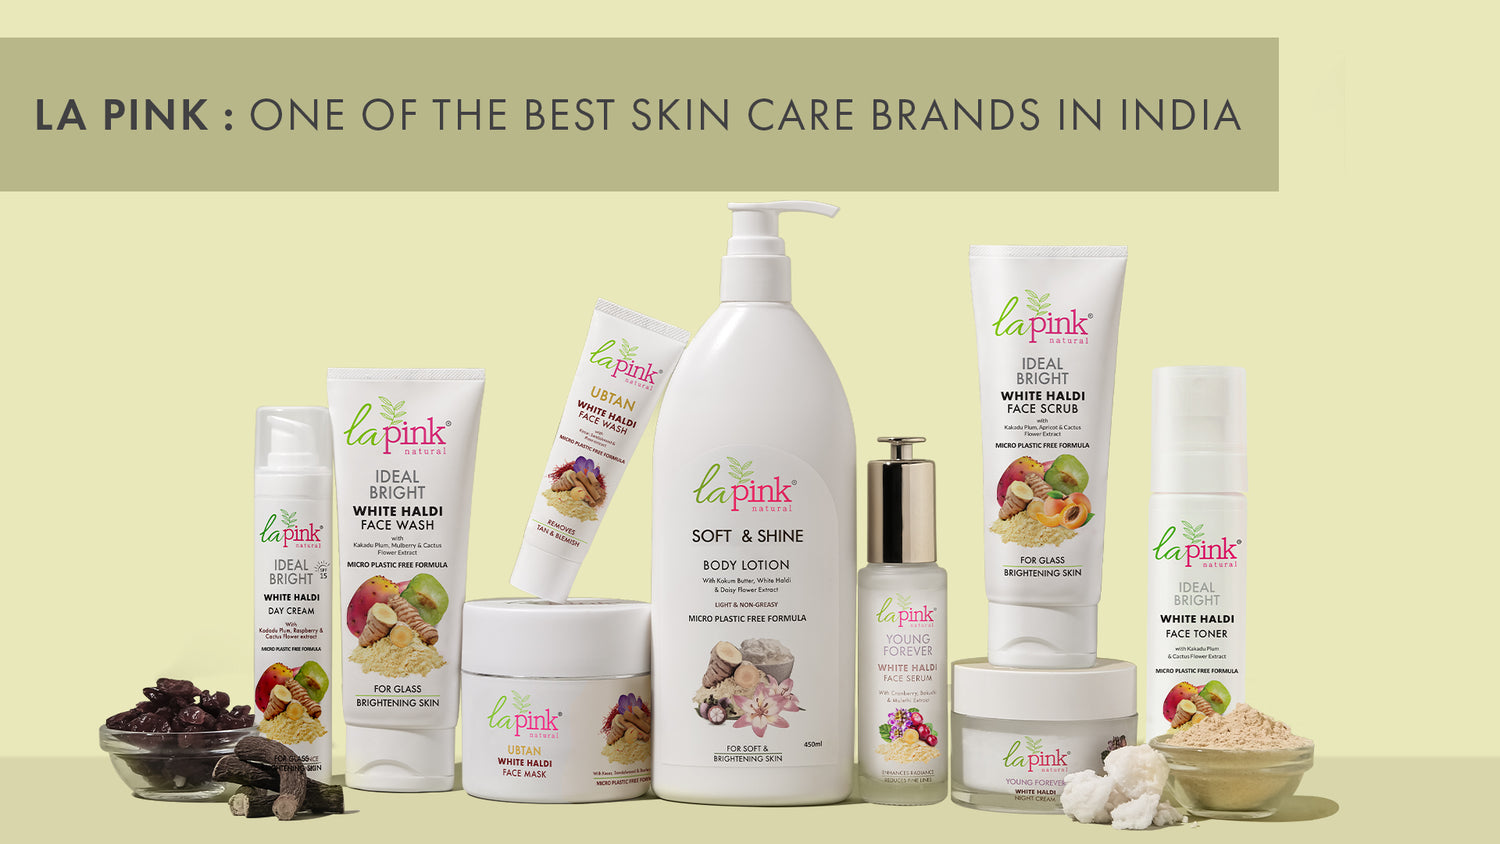 La Pink: One Of The Best Skincare Brands in India